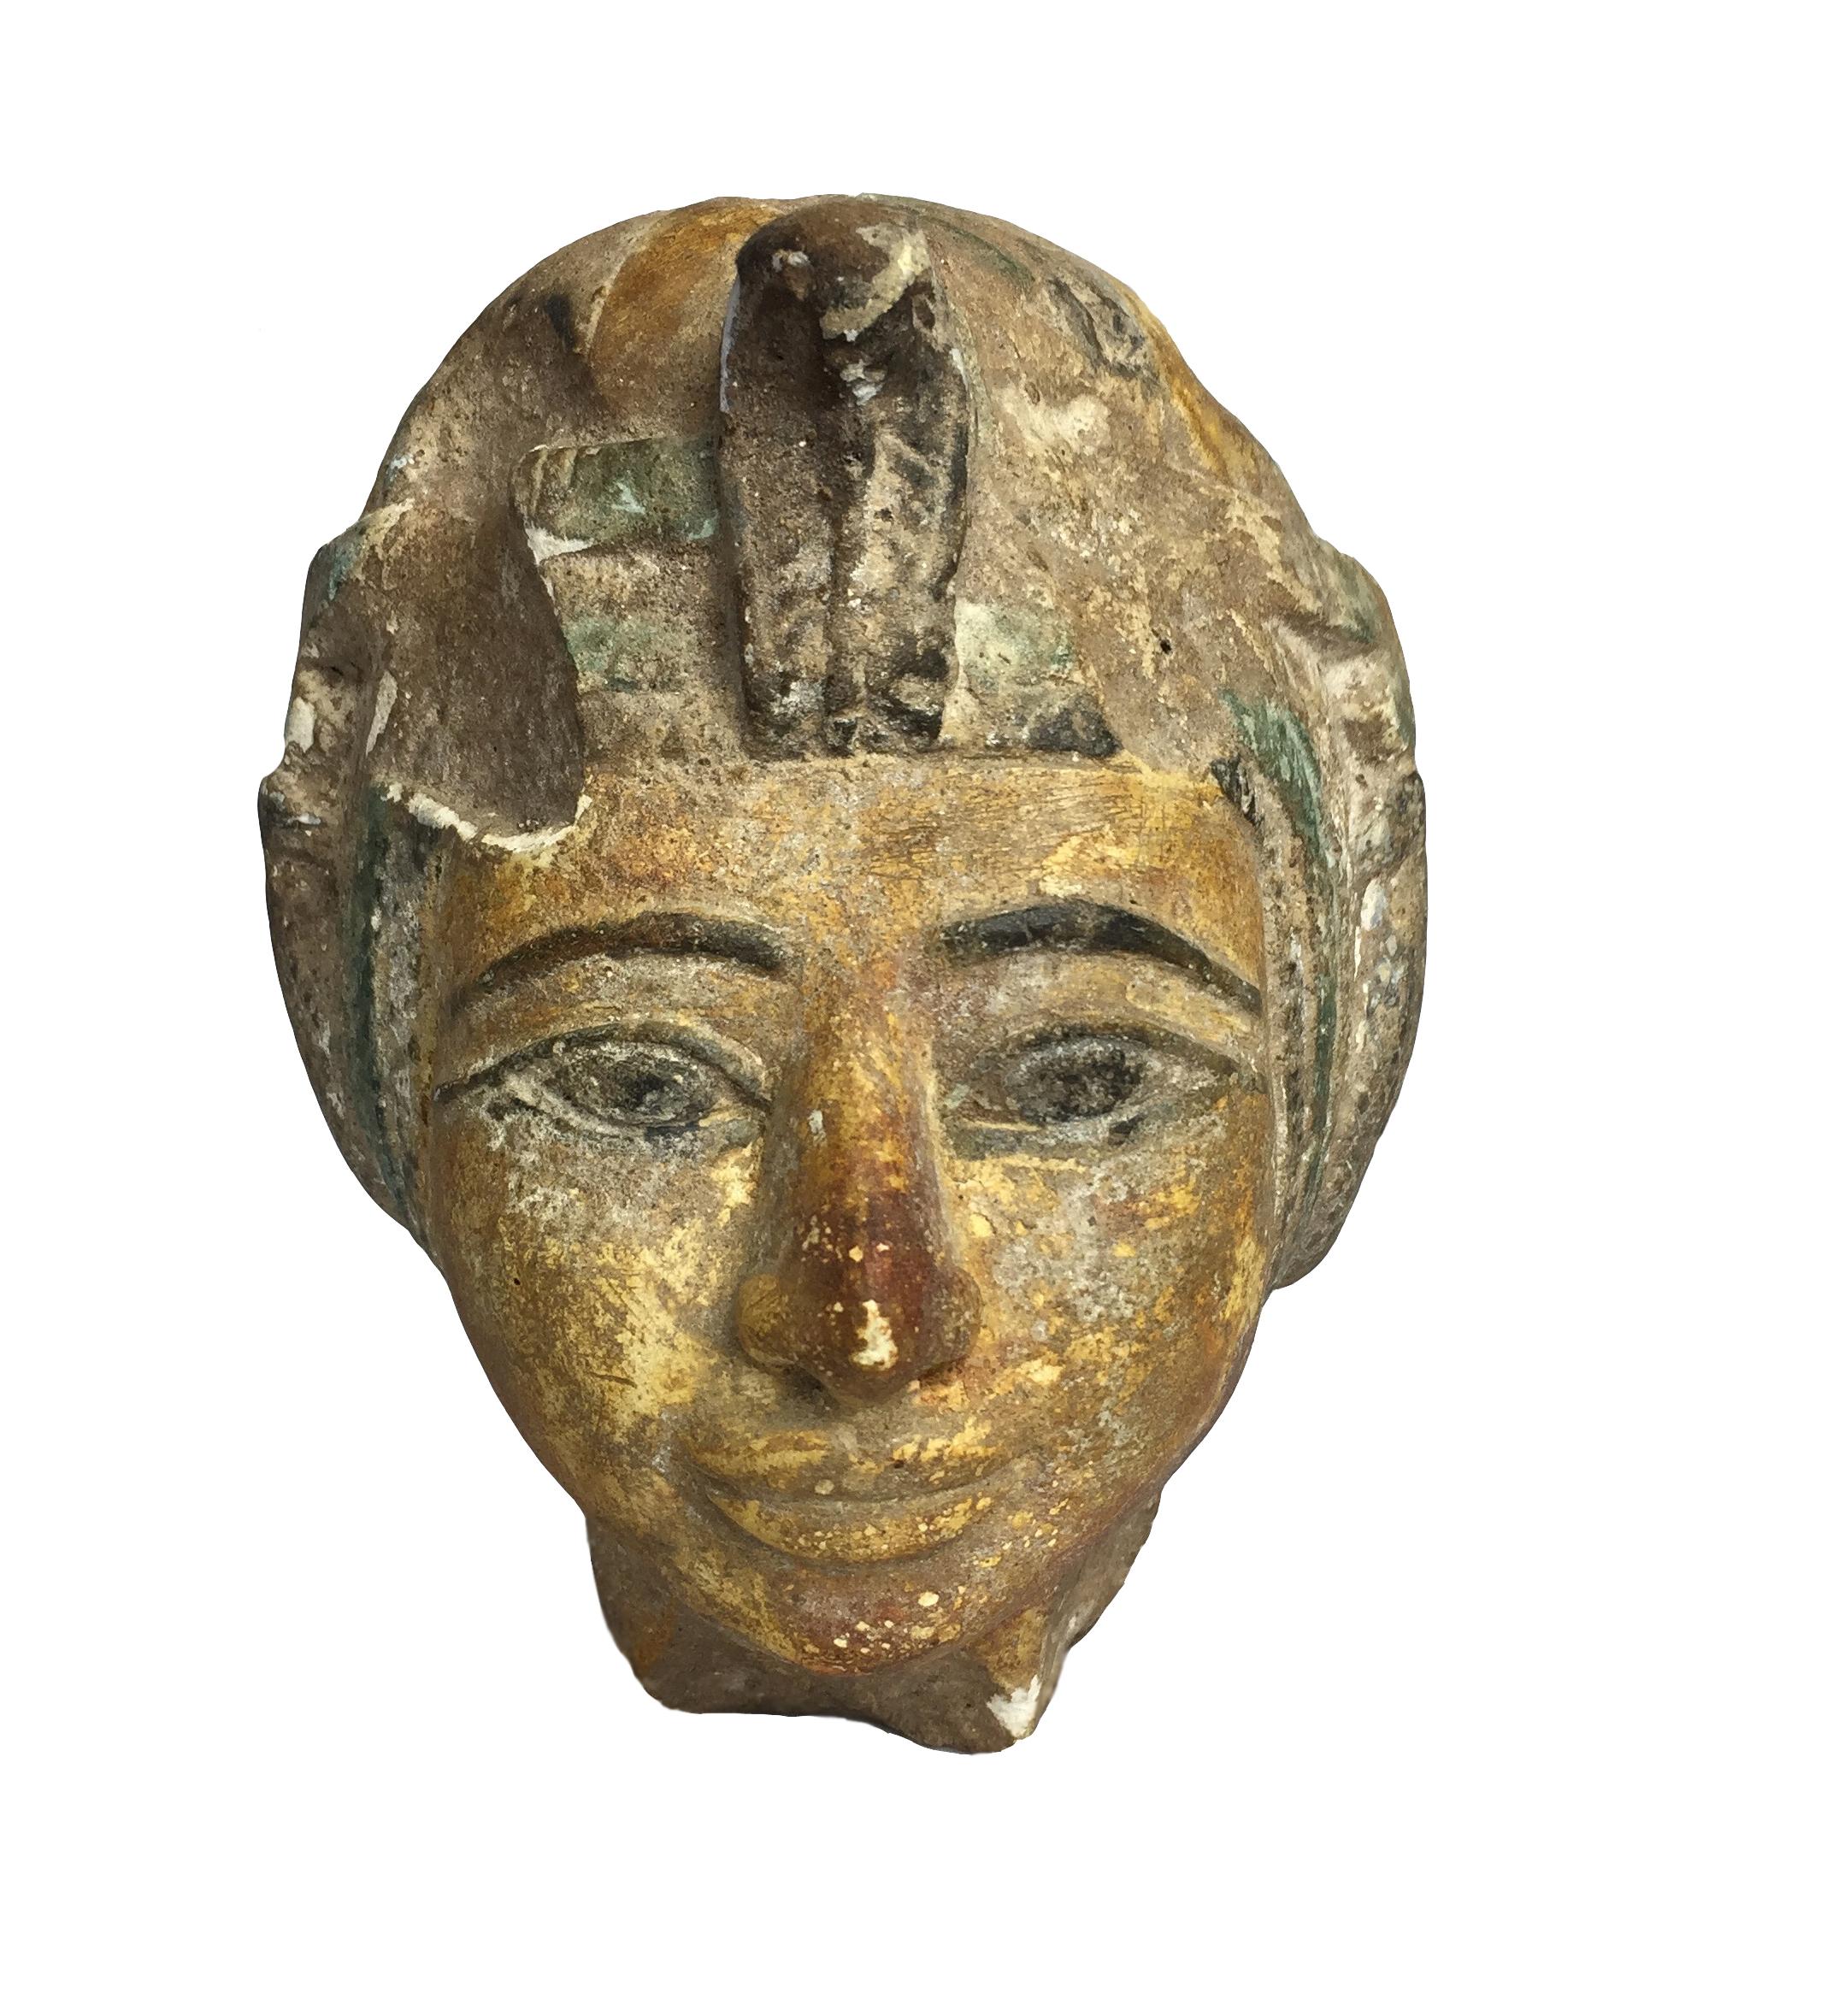 A wonderfully decorative polychromed limestone head in the Egyptian style.

The shape and weight of the head makes it a very impressive artefact with excellent workmanship.

Most probably 19th century. Would look fantastic in the cabinet of